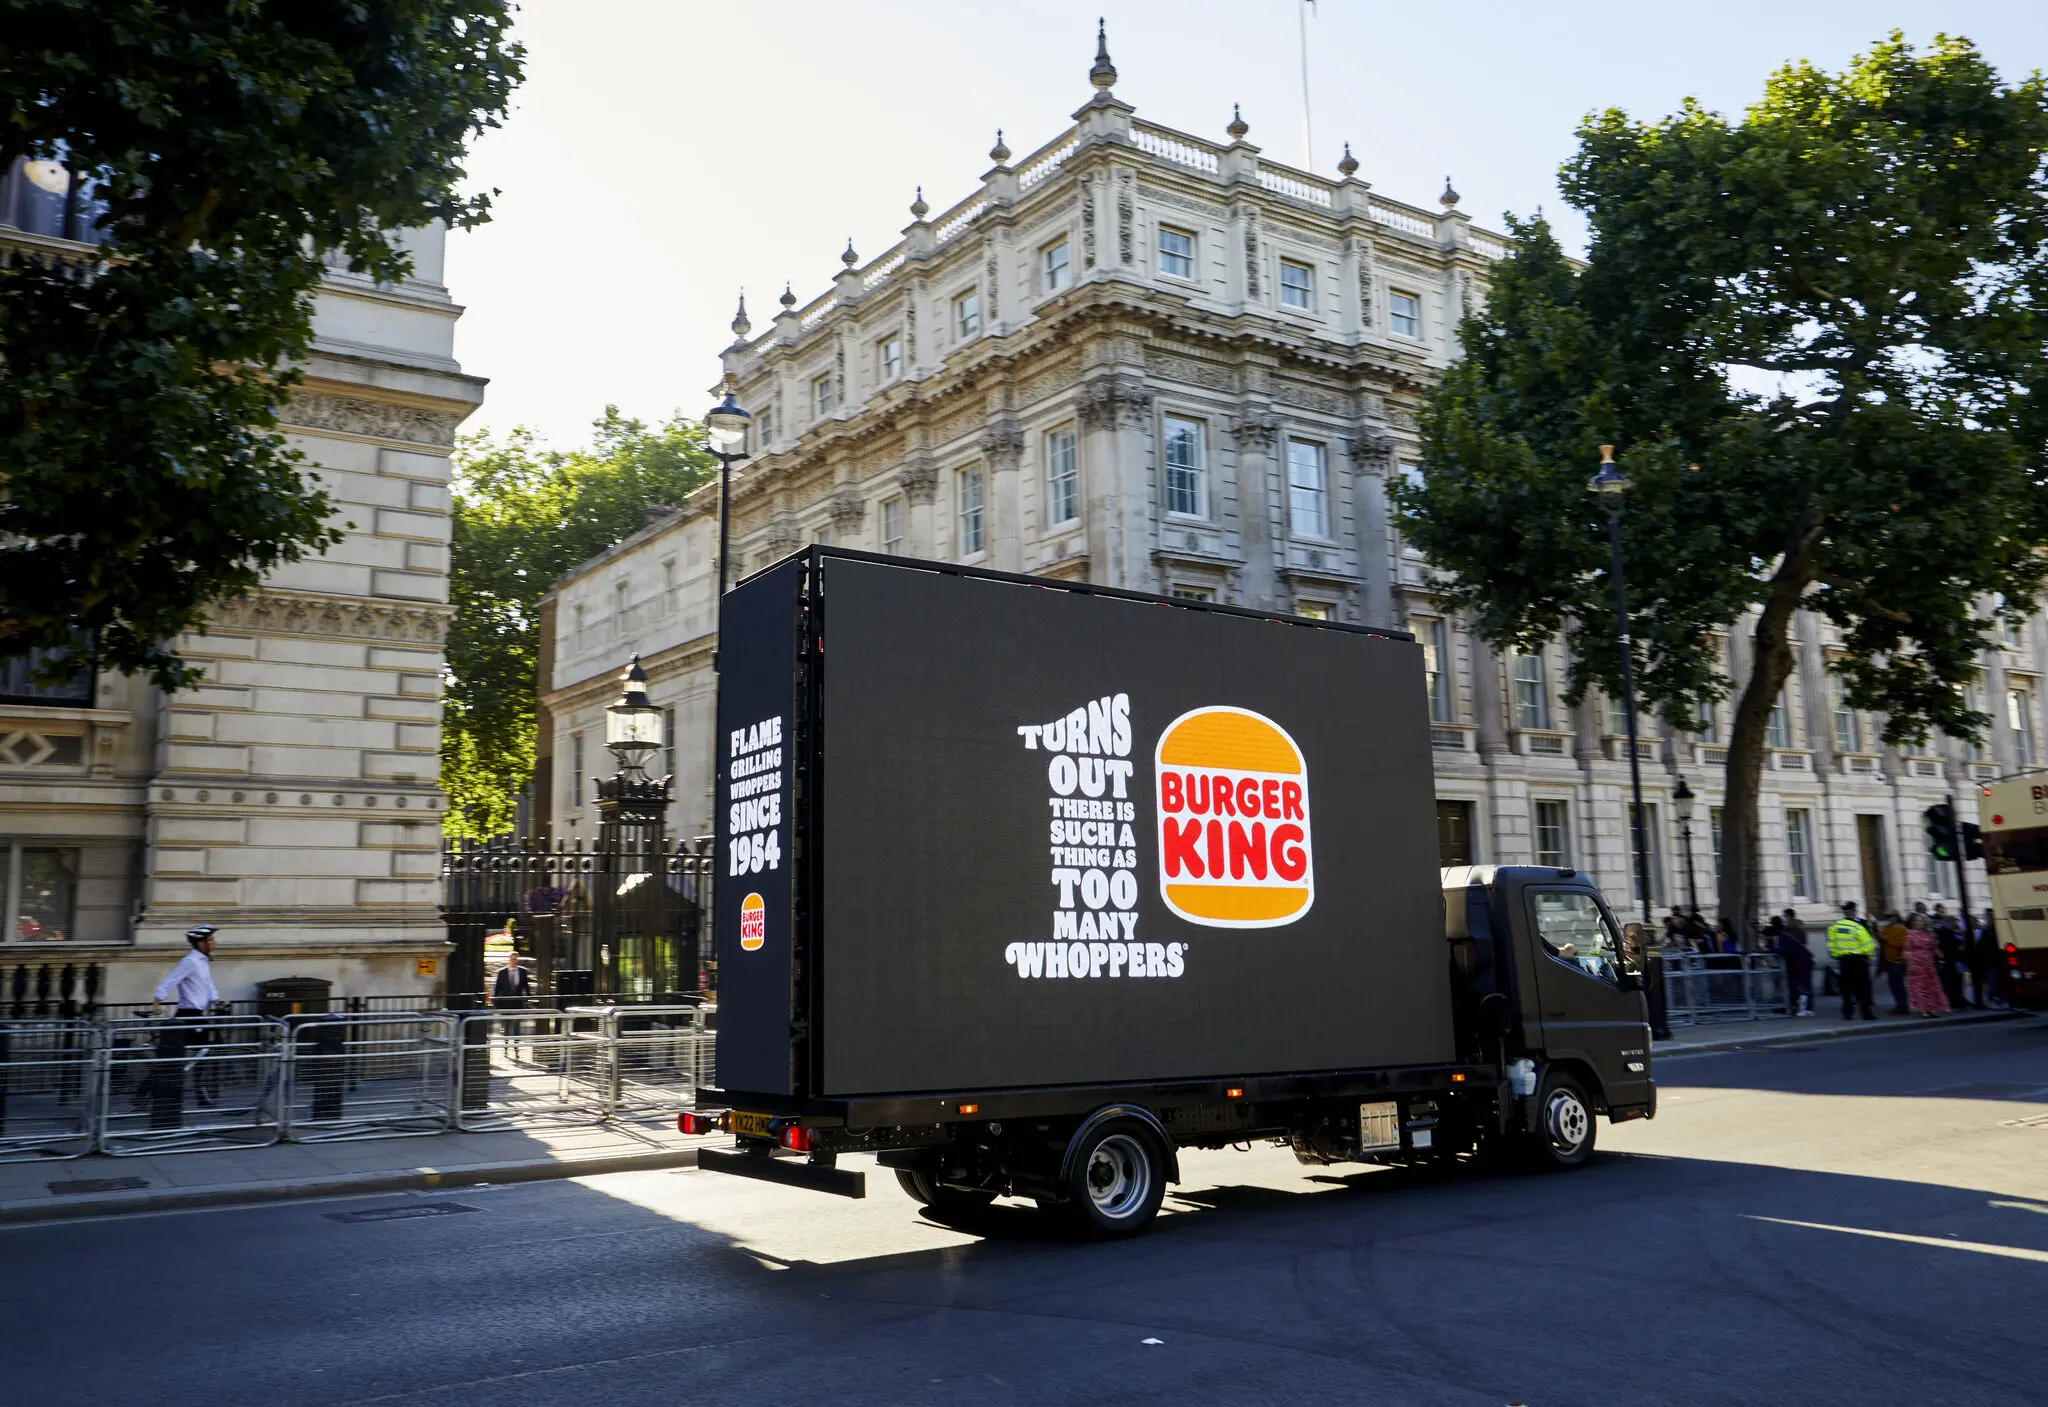 Valla Móvil Digital de Burger King, Turns Out there is such a thing as too many whoopers